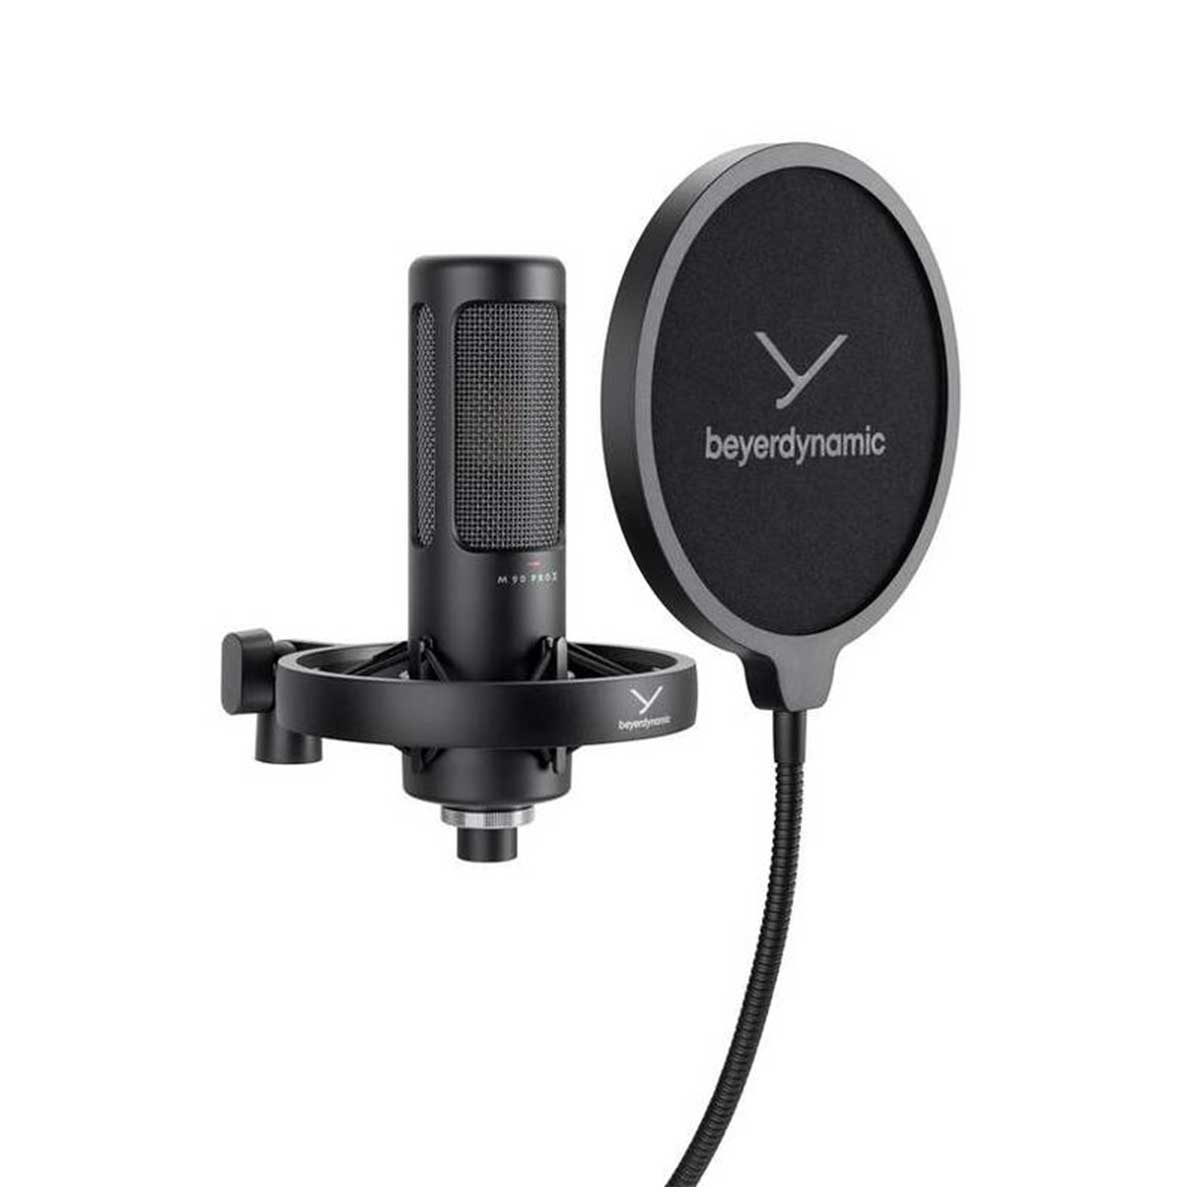 Beyerdynamic M 90 PRO X Condenser Microphone for Vocals, Instruments and Voice Recording